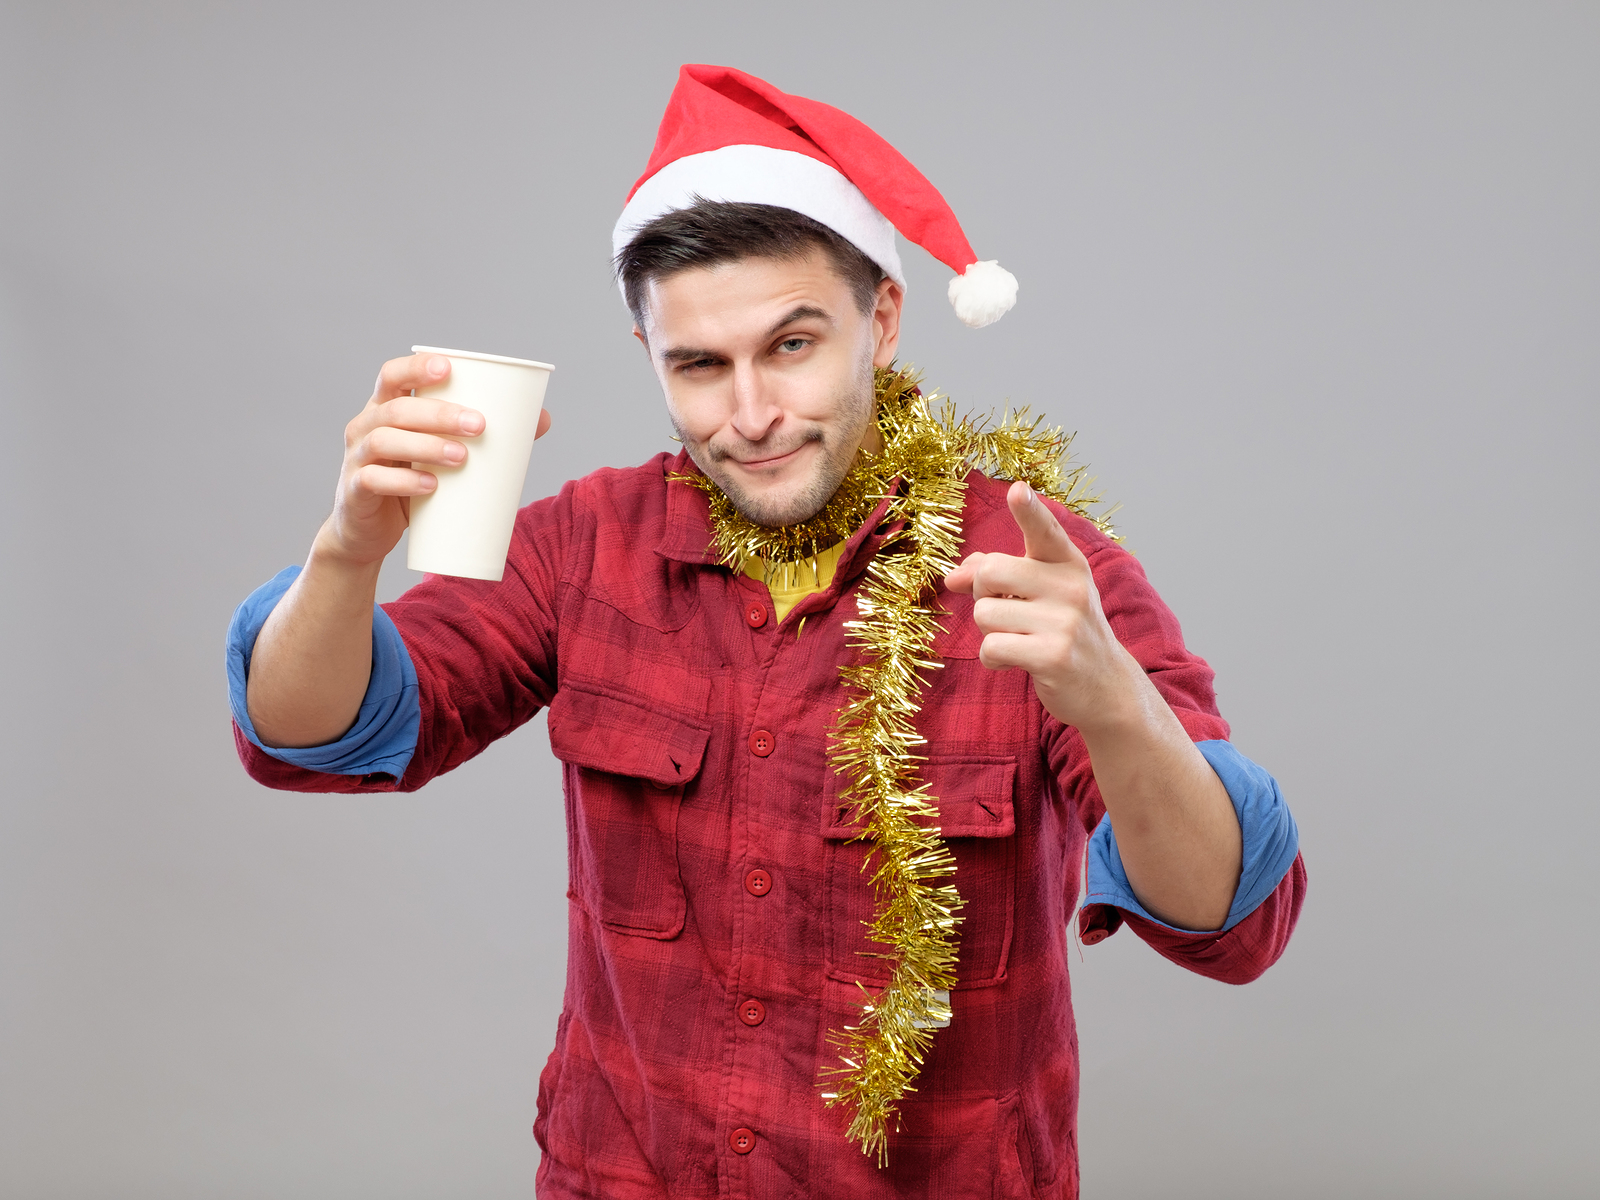 What NOT to do at your next Company Holiday Party